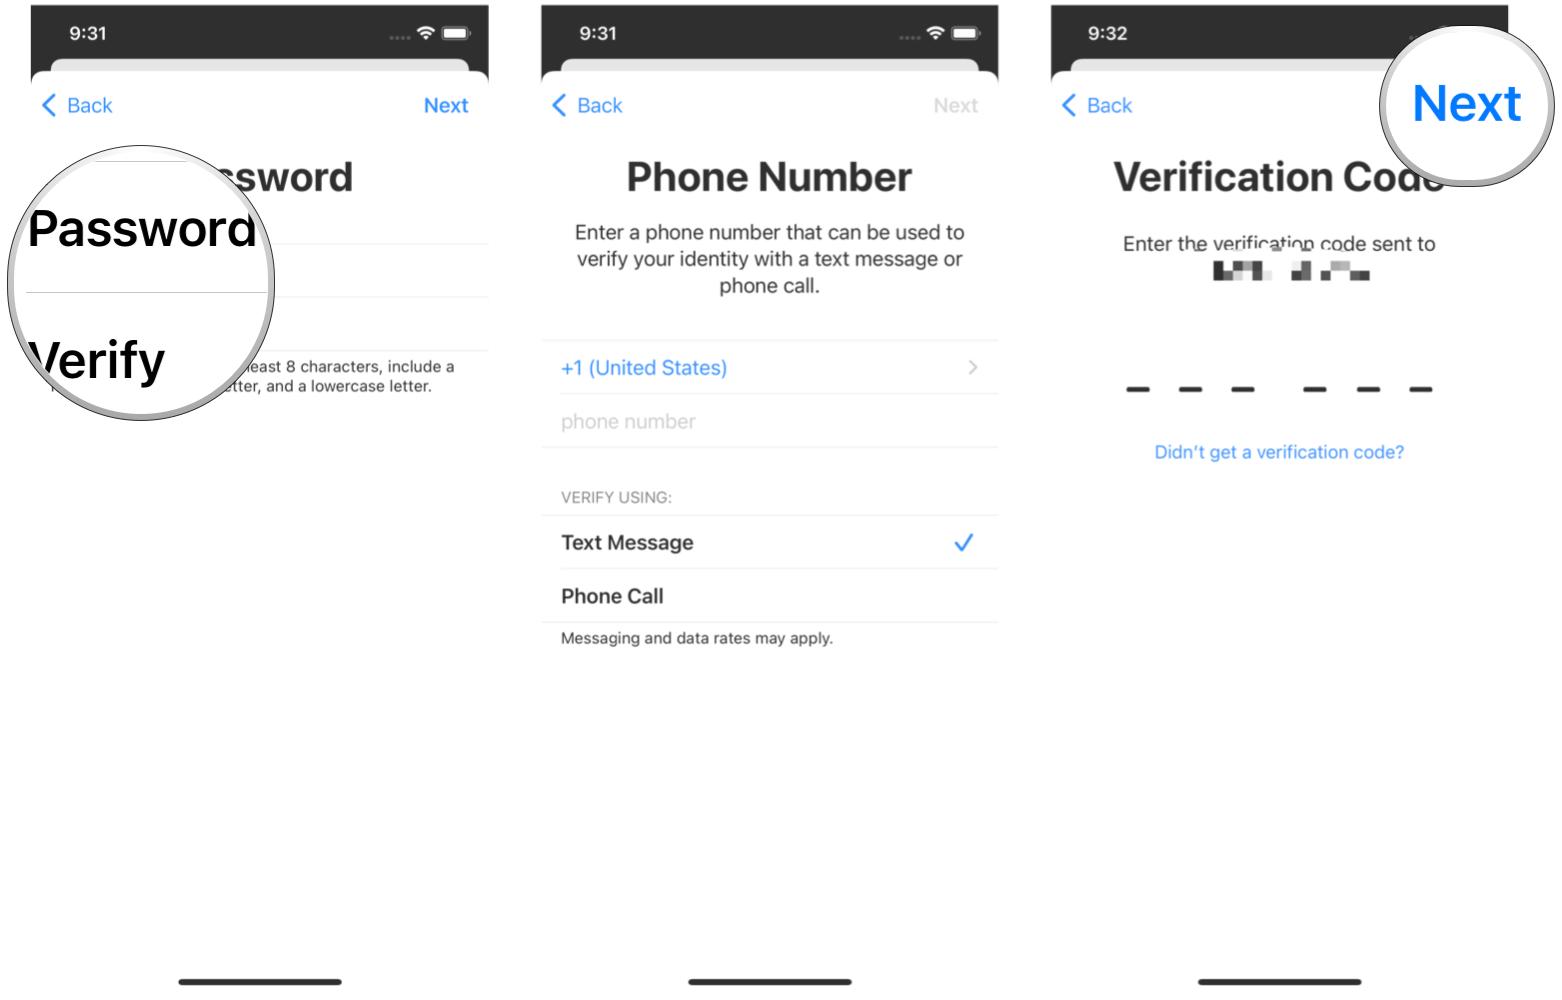 Create a new Apple ID on iPhone by showing: Create a password, verify the password, input a phone number to get a verification code, input the verification code